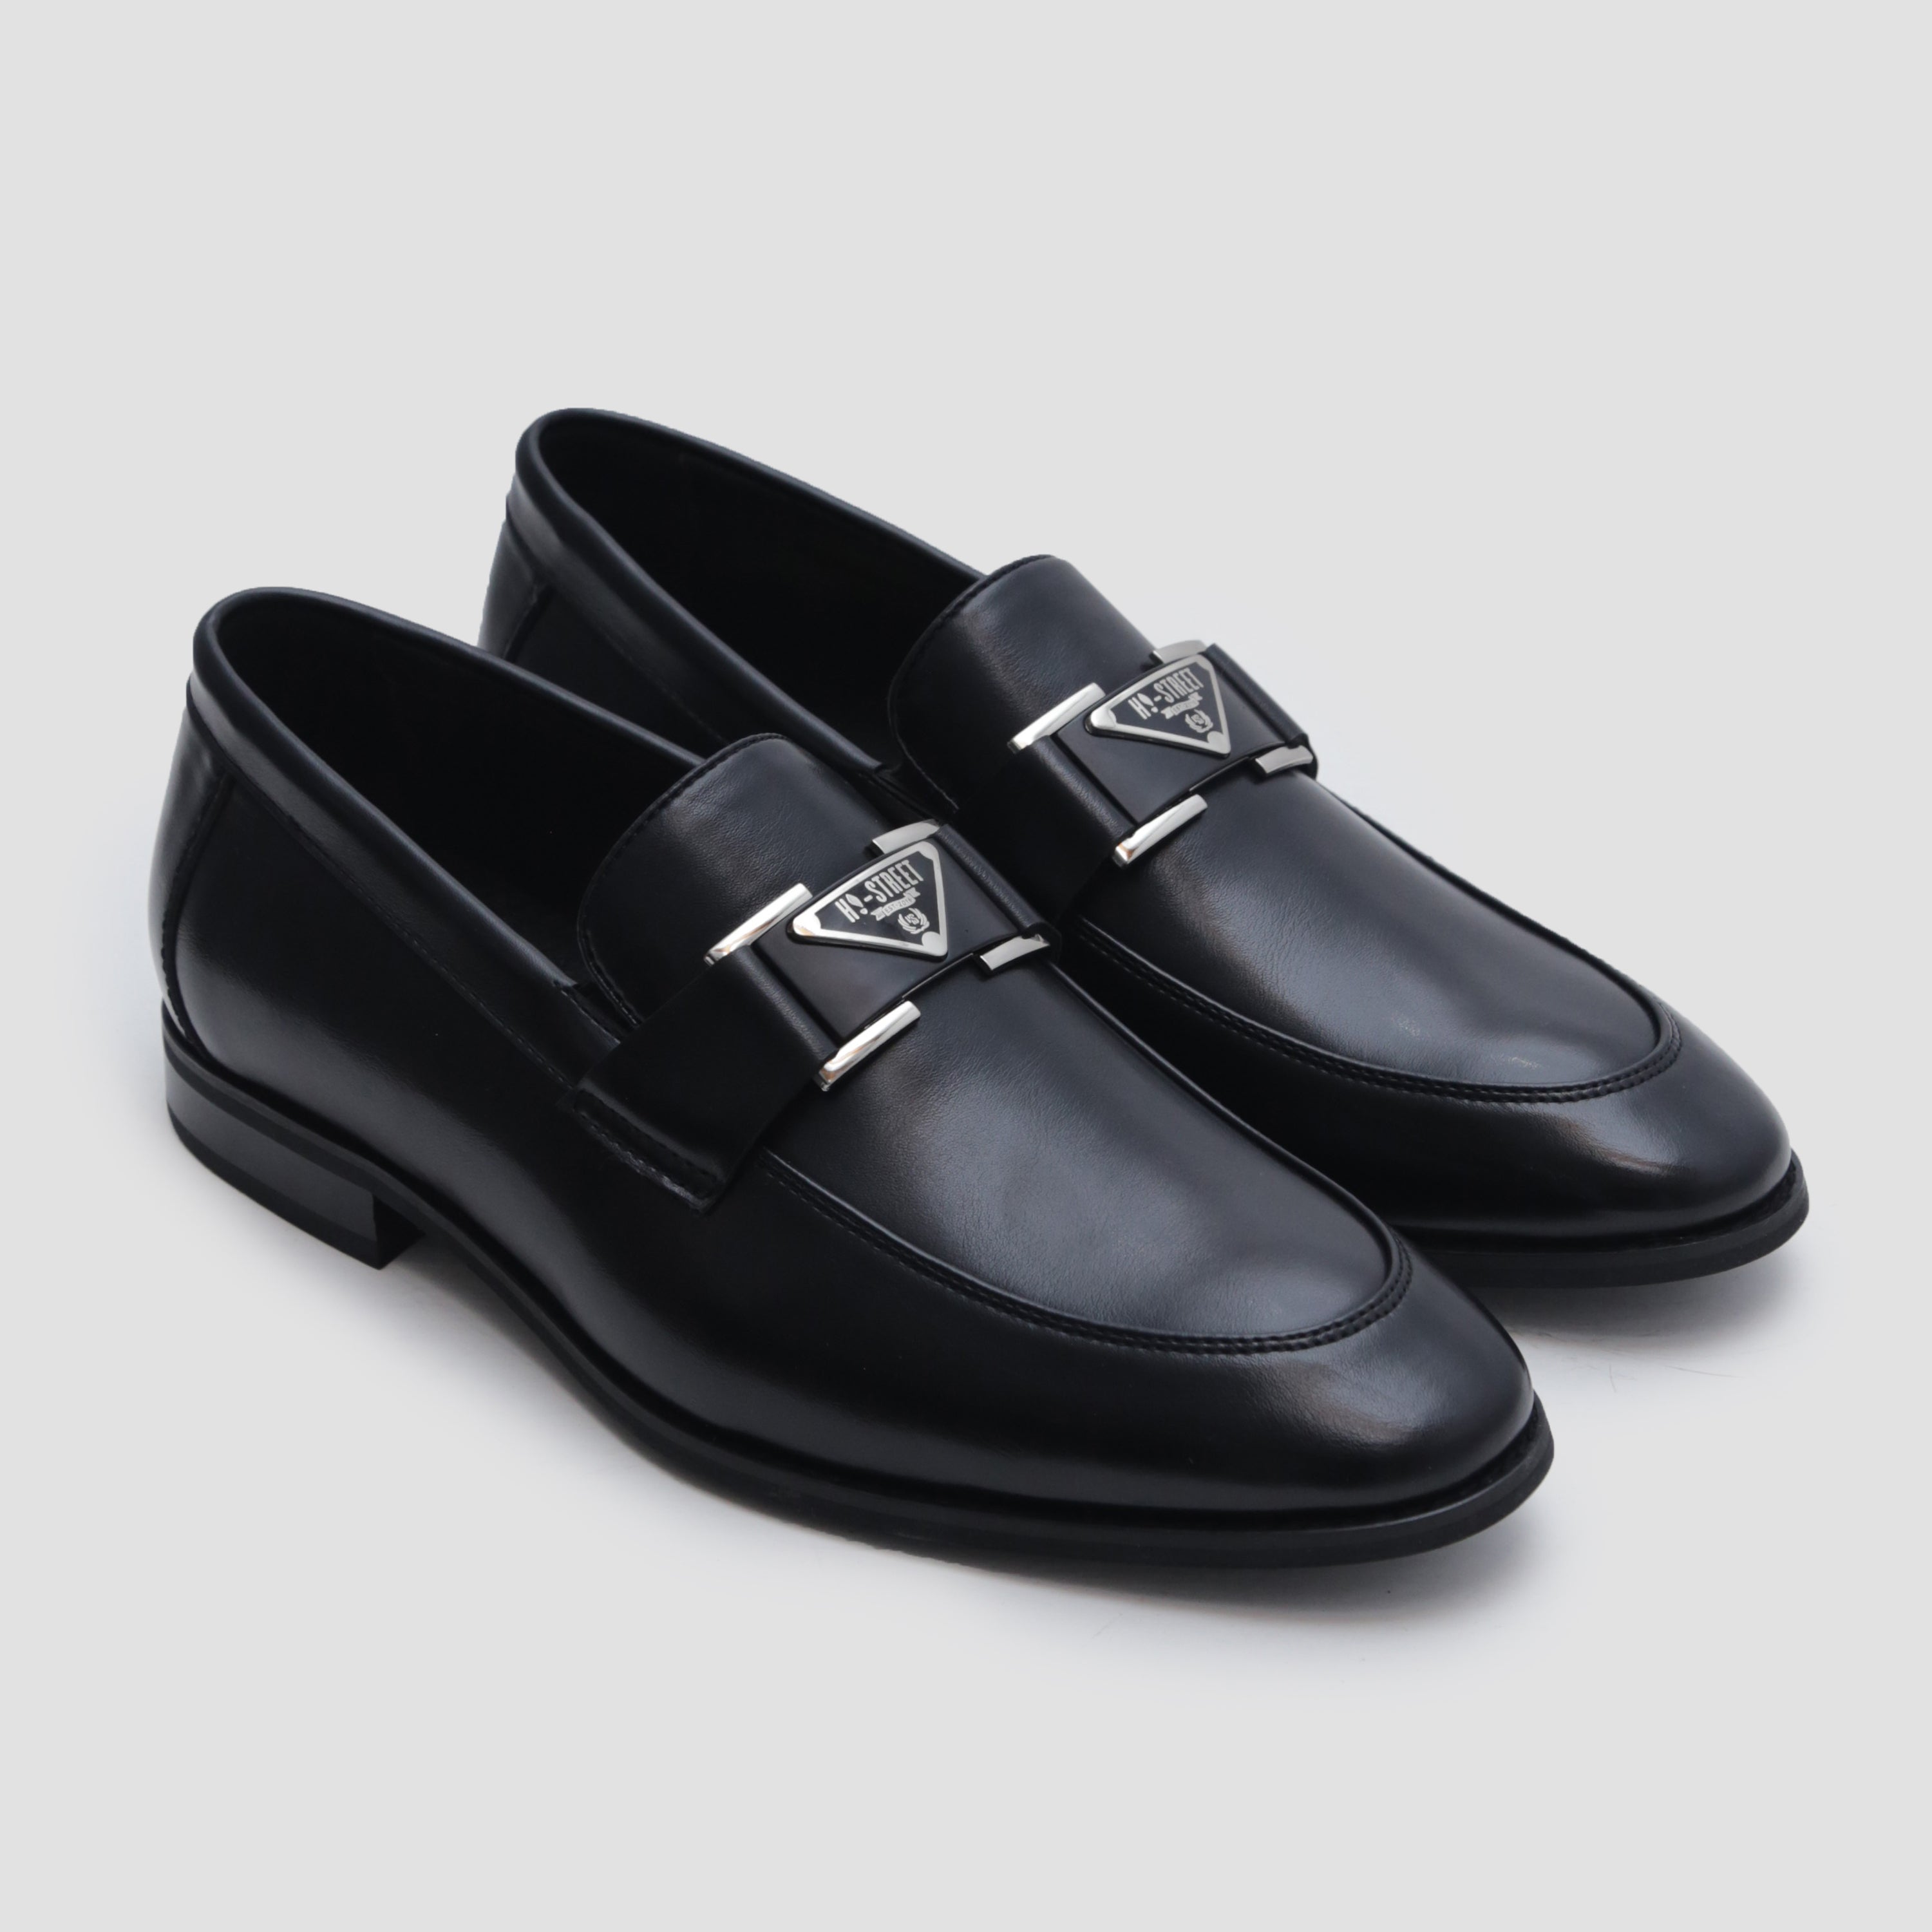 BLACK SHOES WITH BUCKLE